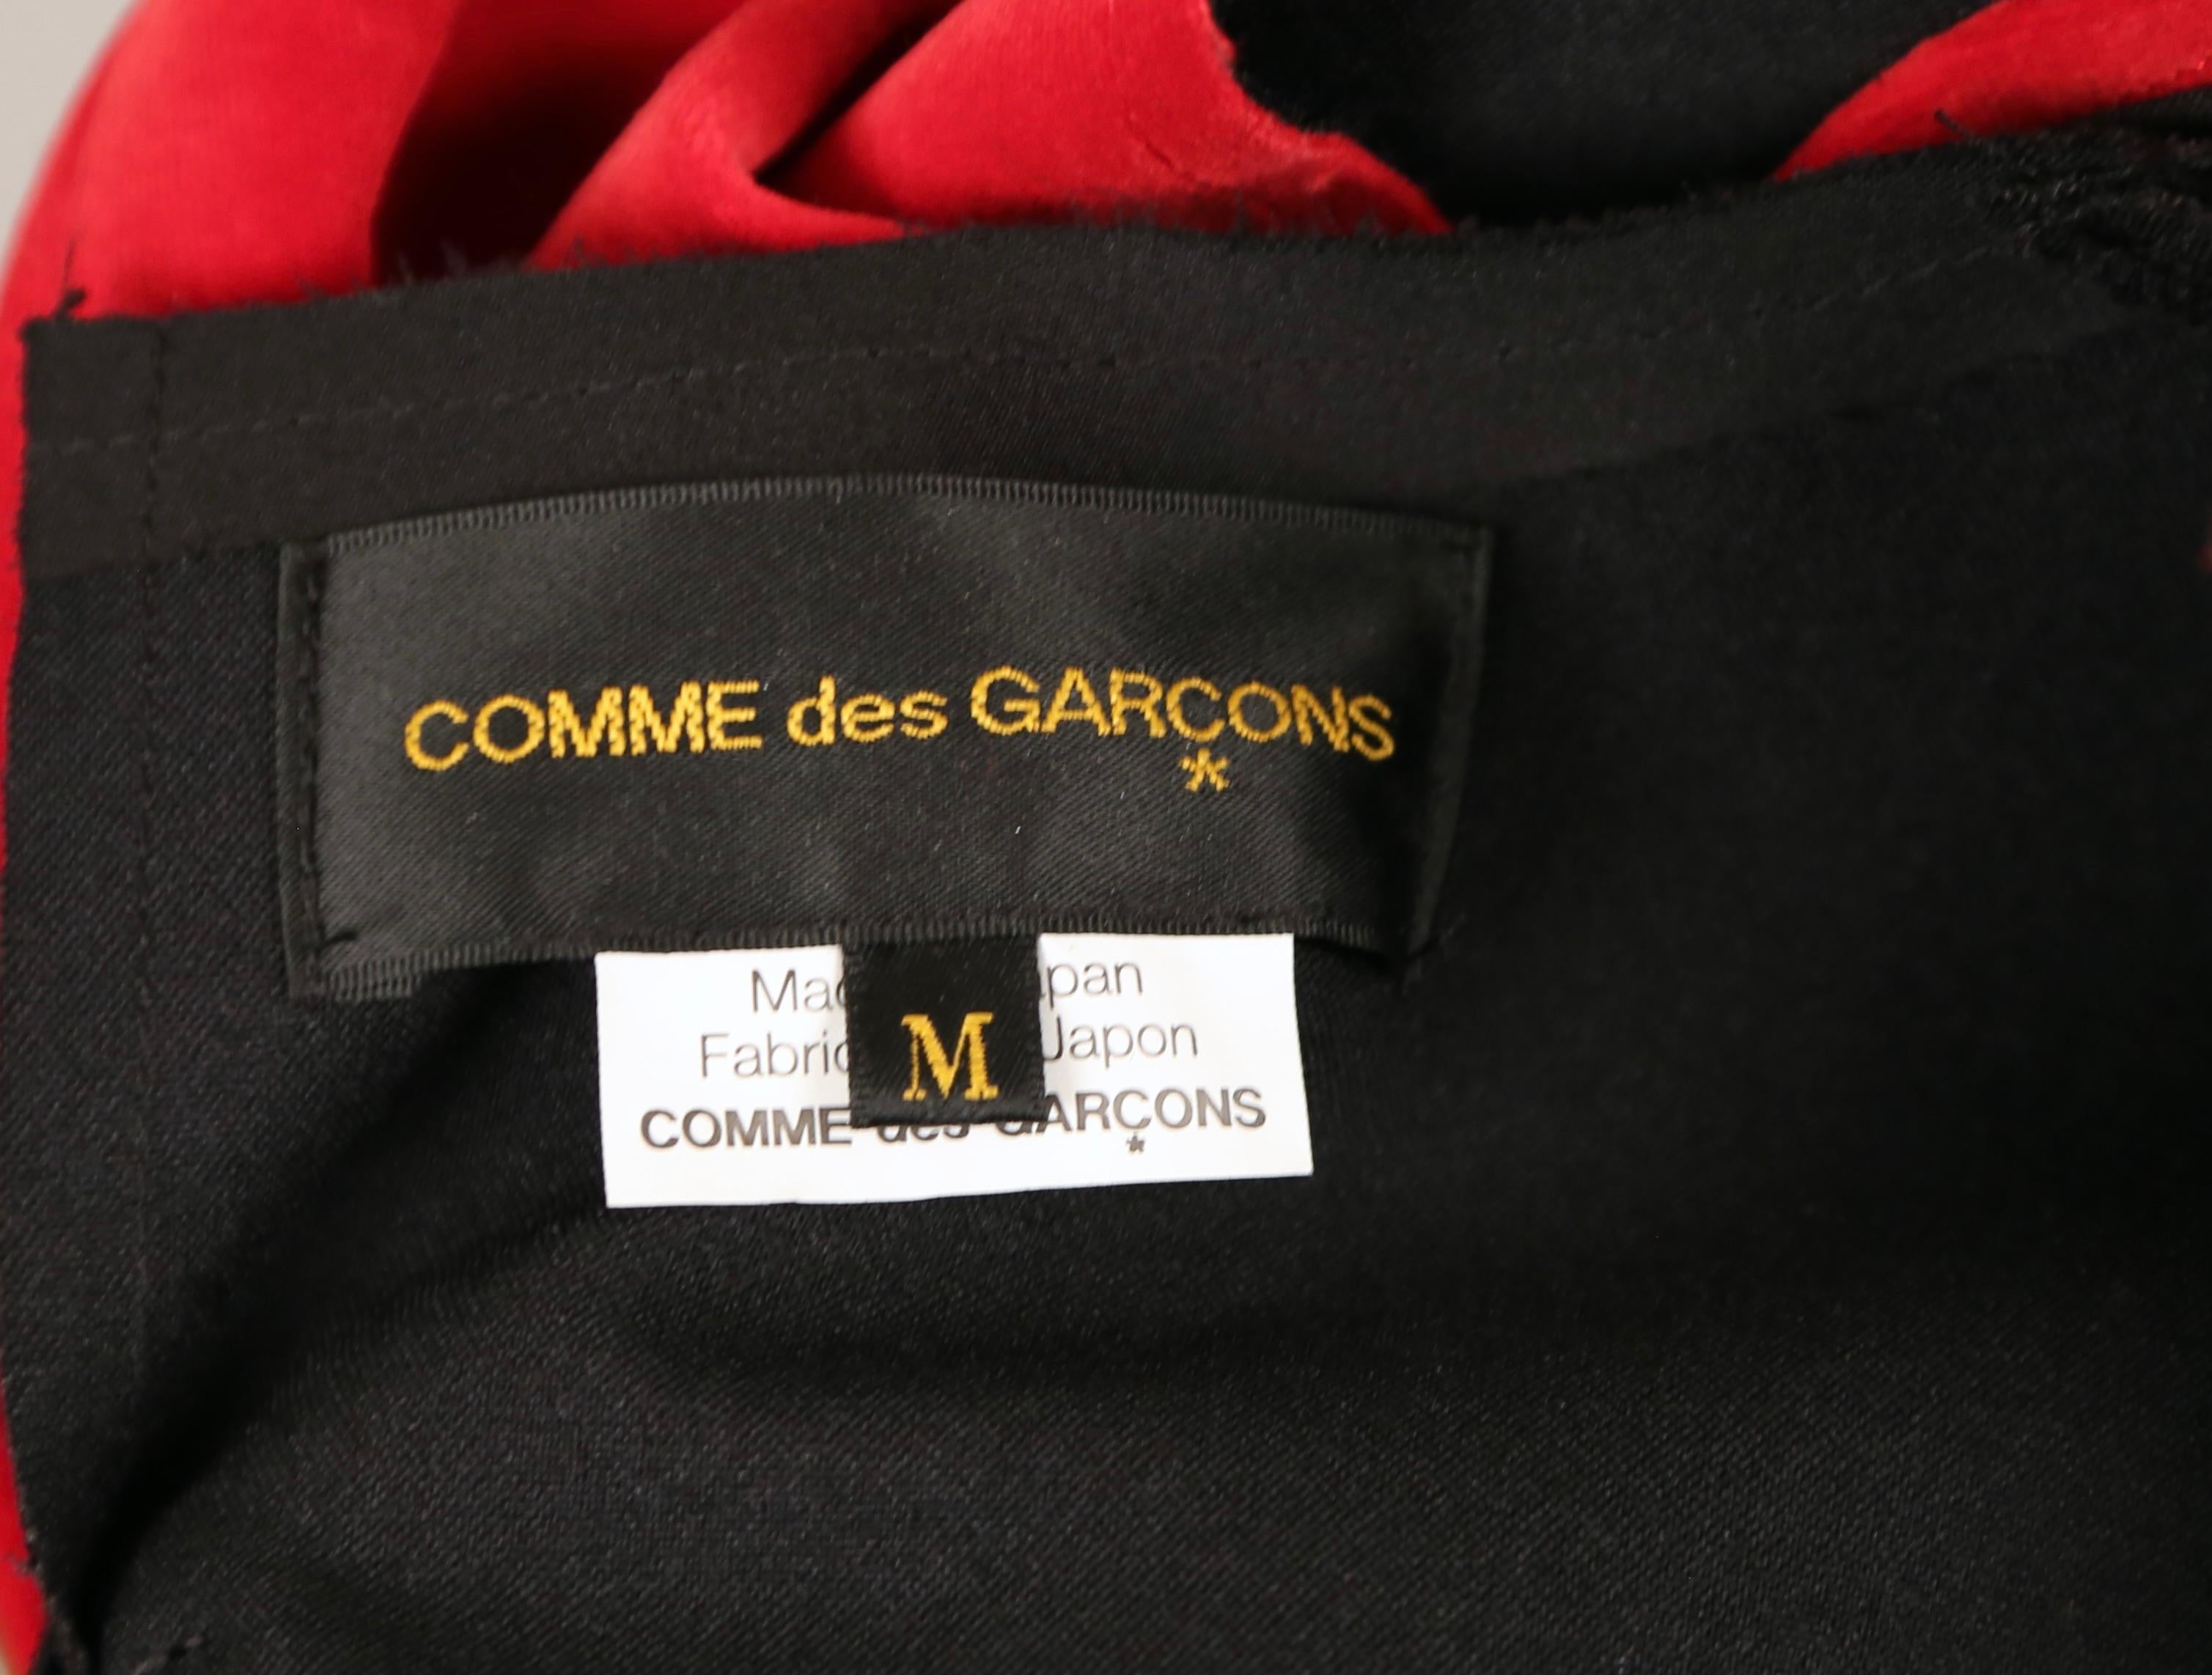 2013 COMME DES GARCONS black and red RUNWAY jacket For Sale 9